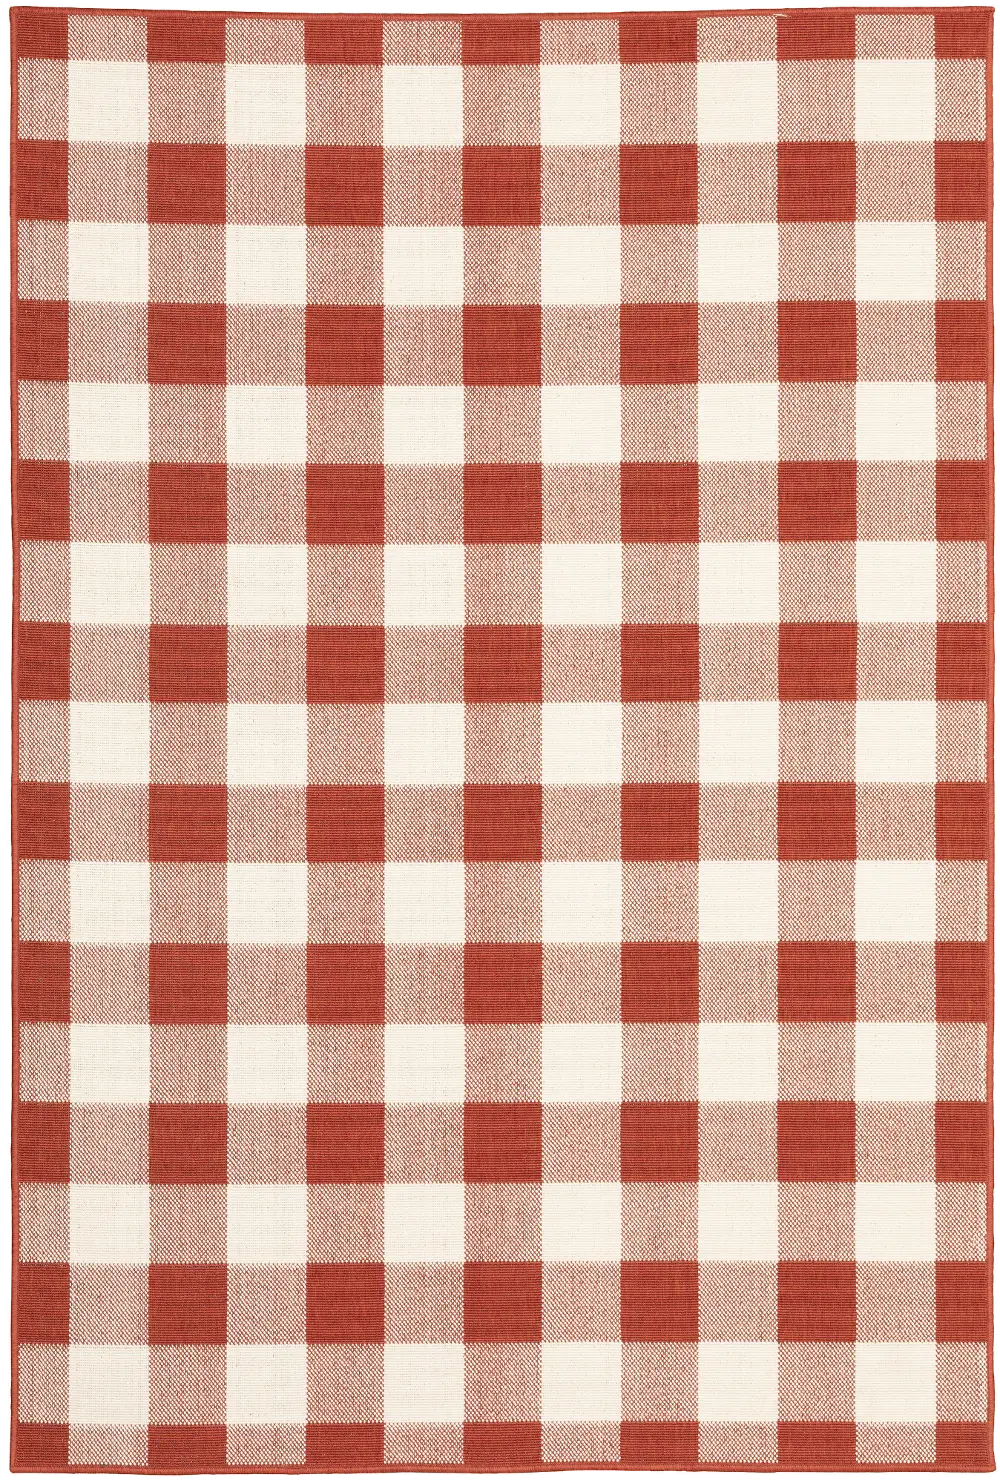 8 x 11 Large Red and Ivory Indoor-Outdoor Rug - Marina-1